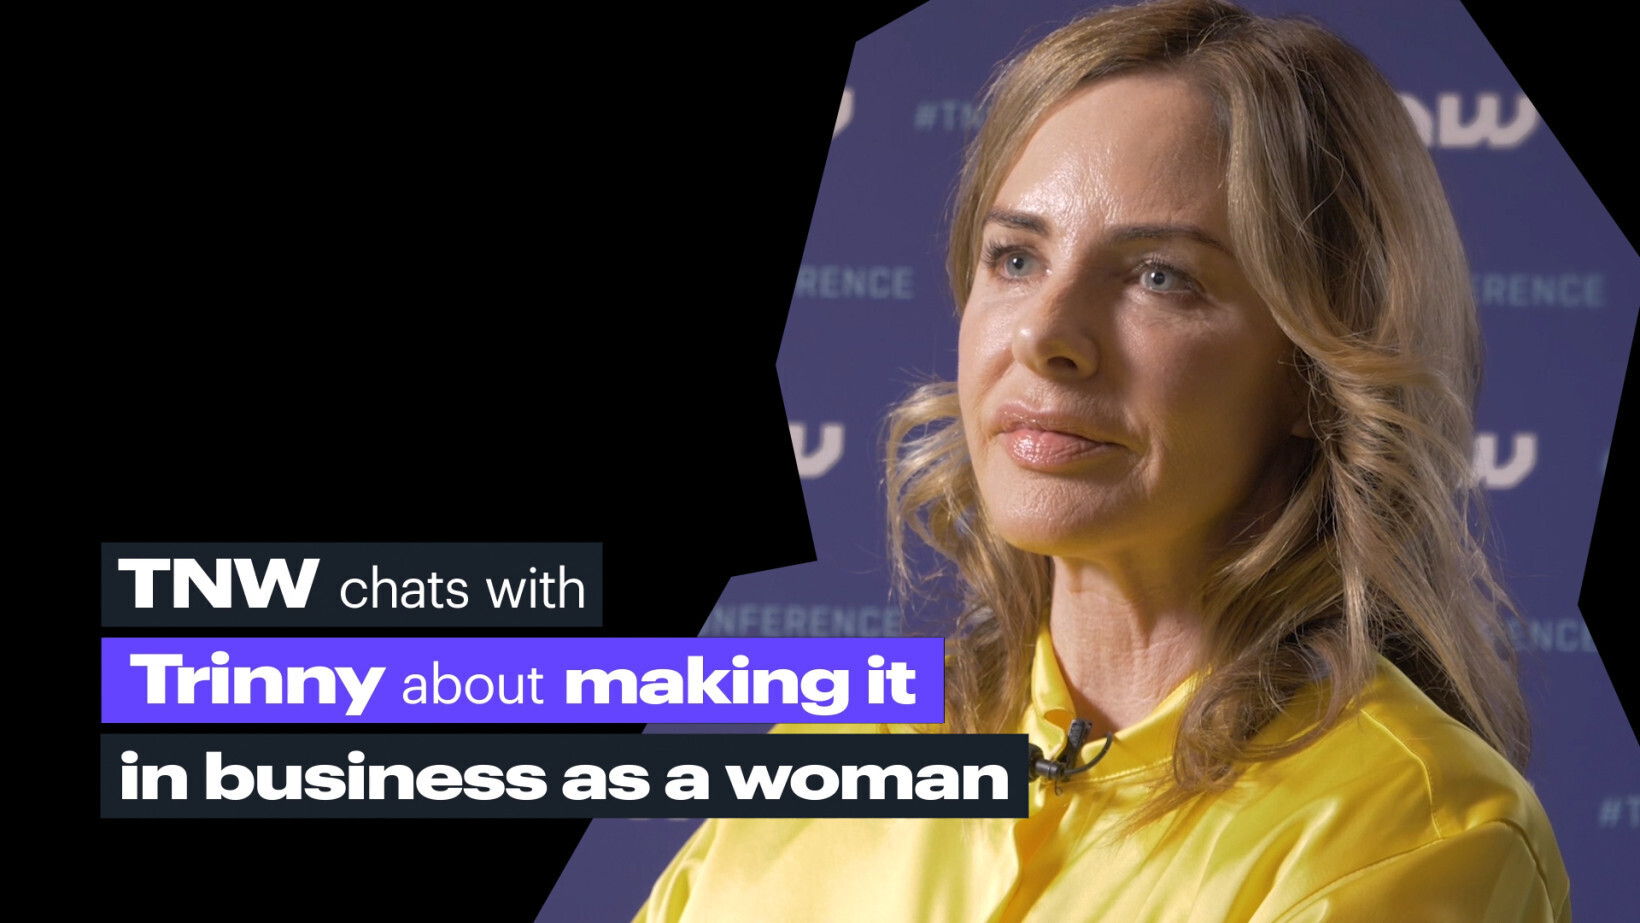 We asked Trinny Woodall how to make it in business as a woman